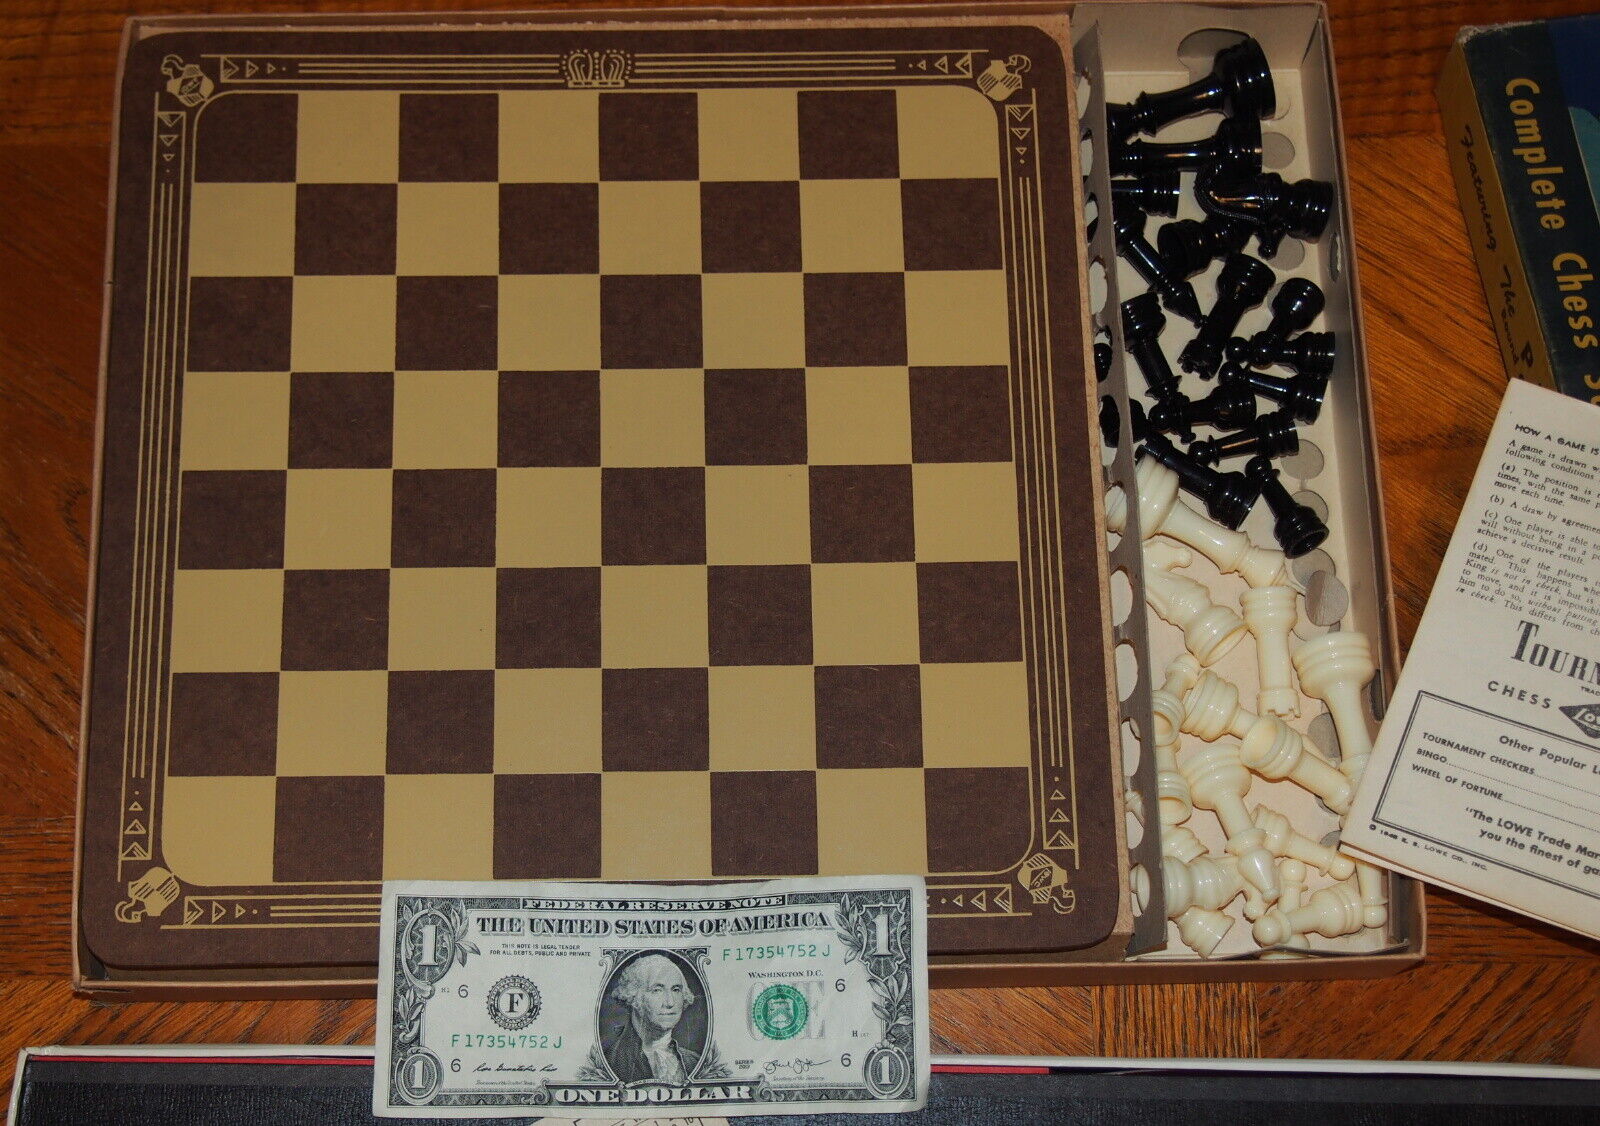 2 VTG Chess Games ALL THE KING'S MEN 1970’s & CHESSMASTER Chess 1940’s USA MADE Parker Brothers & Loew - фотография #7